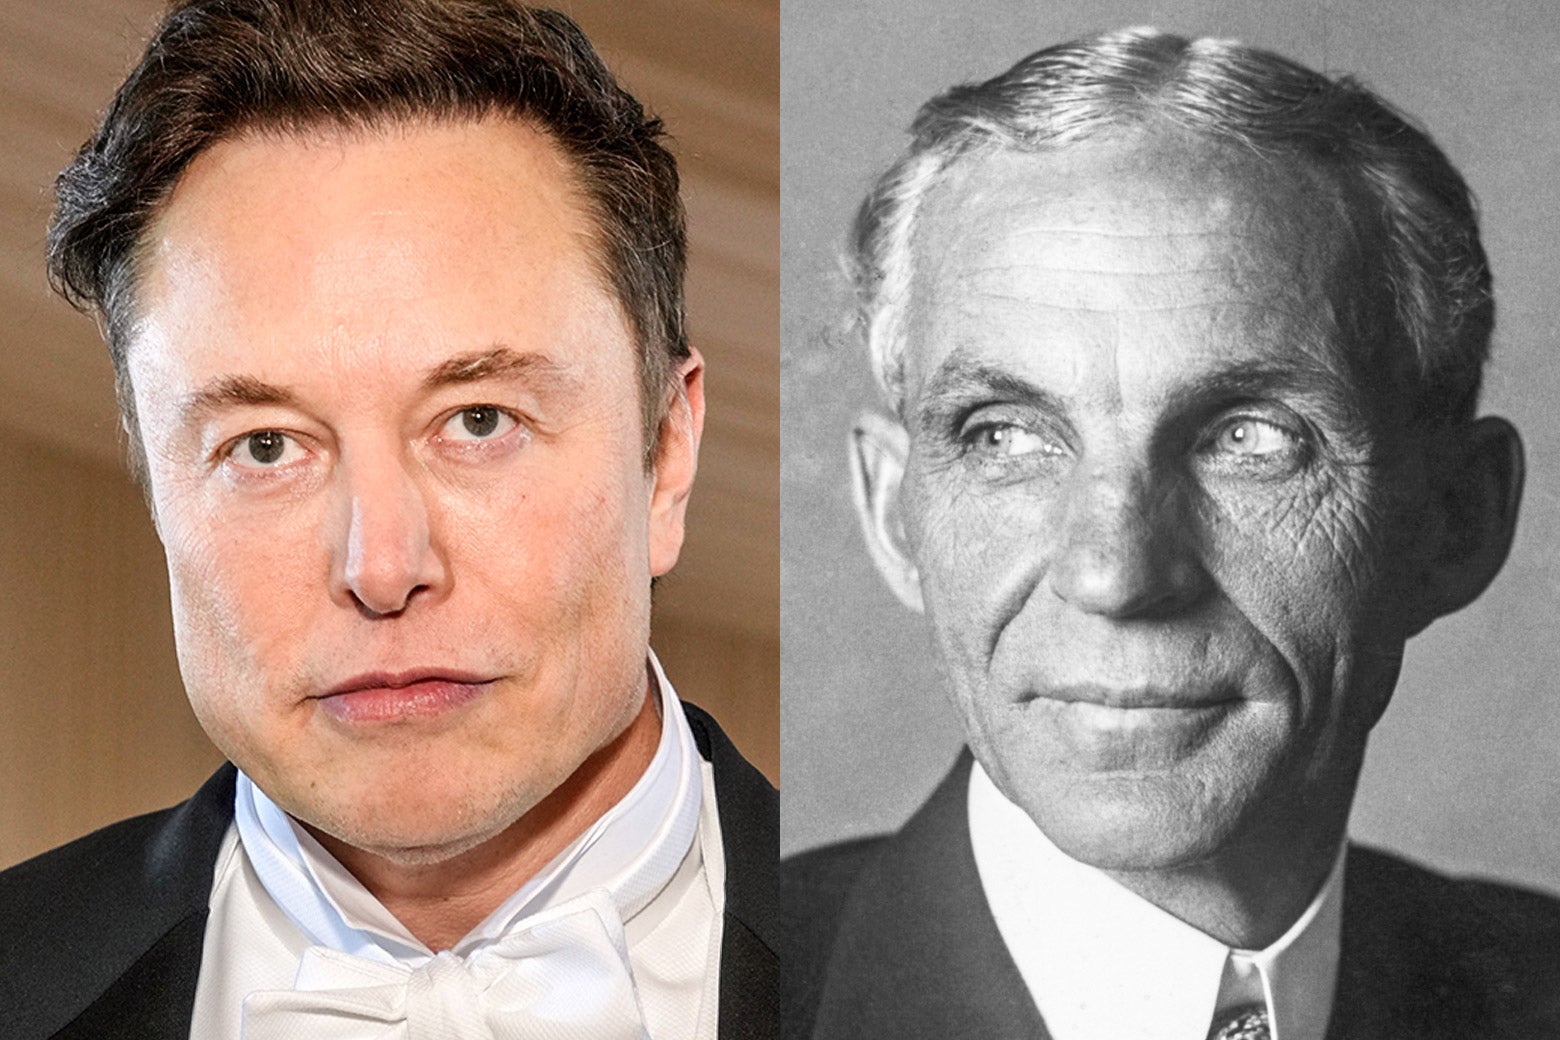 Elon Musk Went From Being Like Henry Ford in a Good Way to a Bad Way